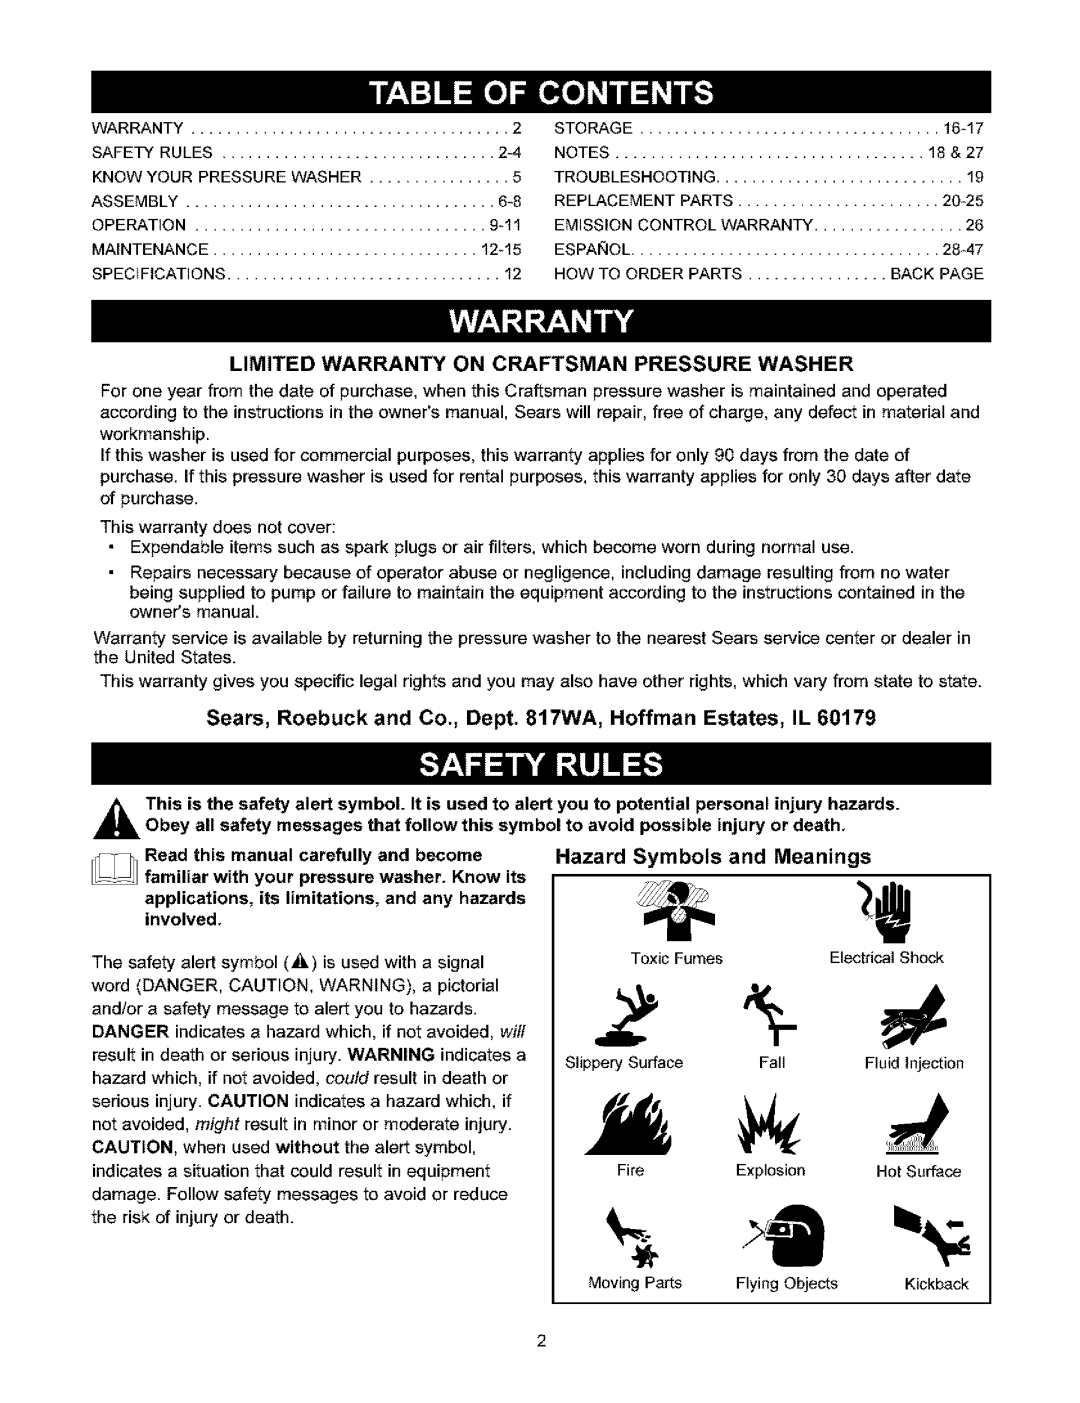 Craftsman 580.753 manual Limited Warranty On Craftsman Pressure Washer, Hazard Symbols and Meanings 